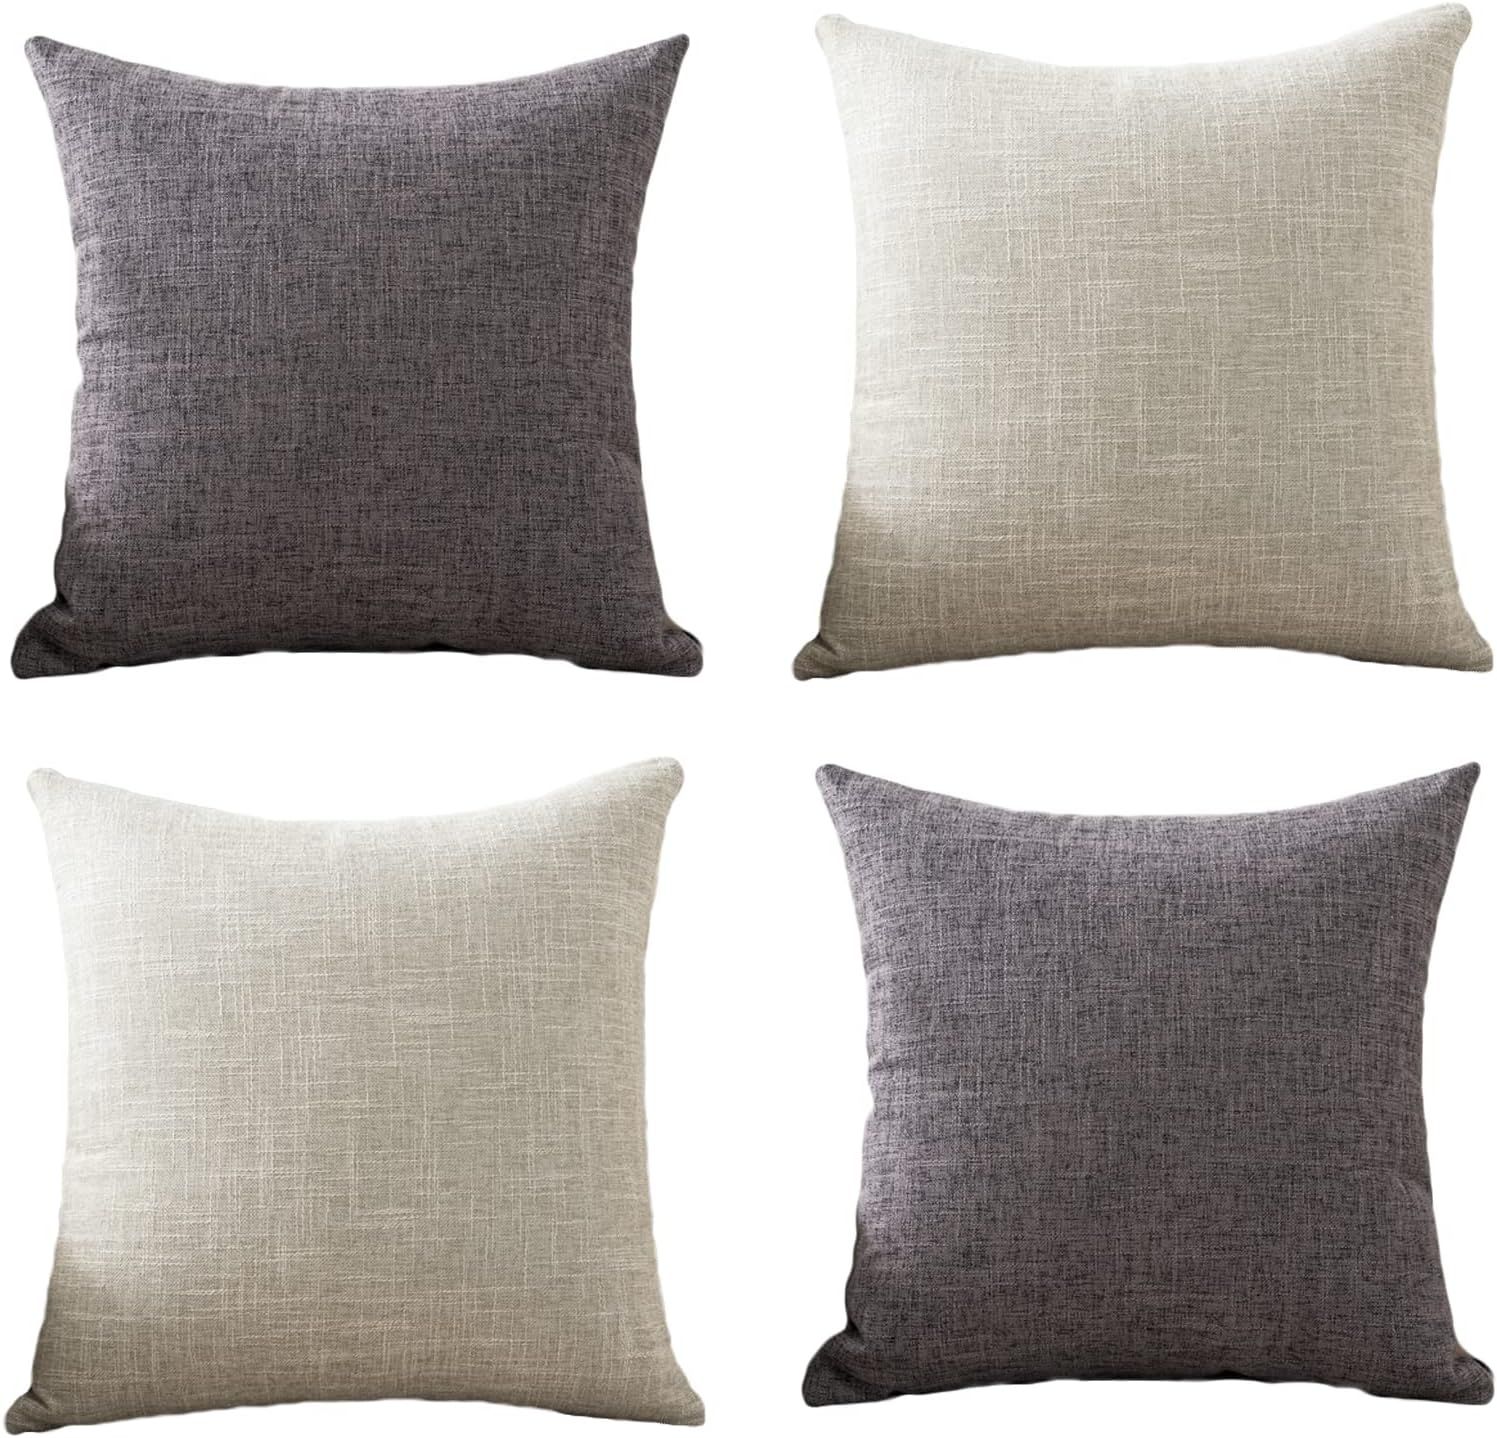 Renil Decorative Throw Pillow Covers Set of 4 Couch Pillowcases | Amazon (US)